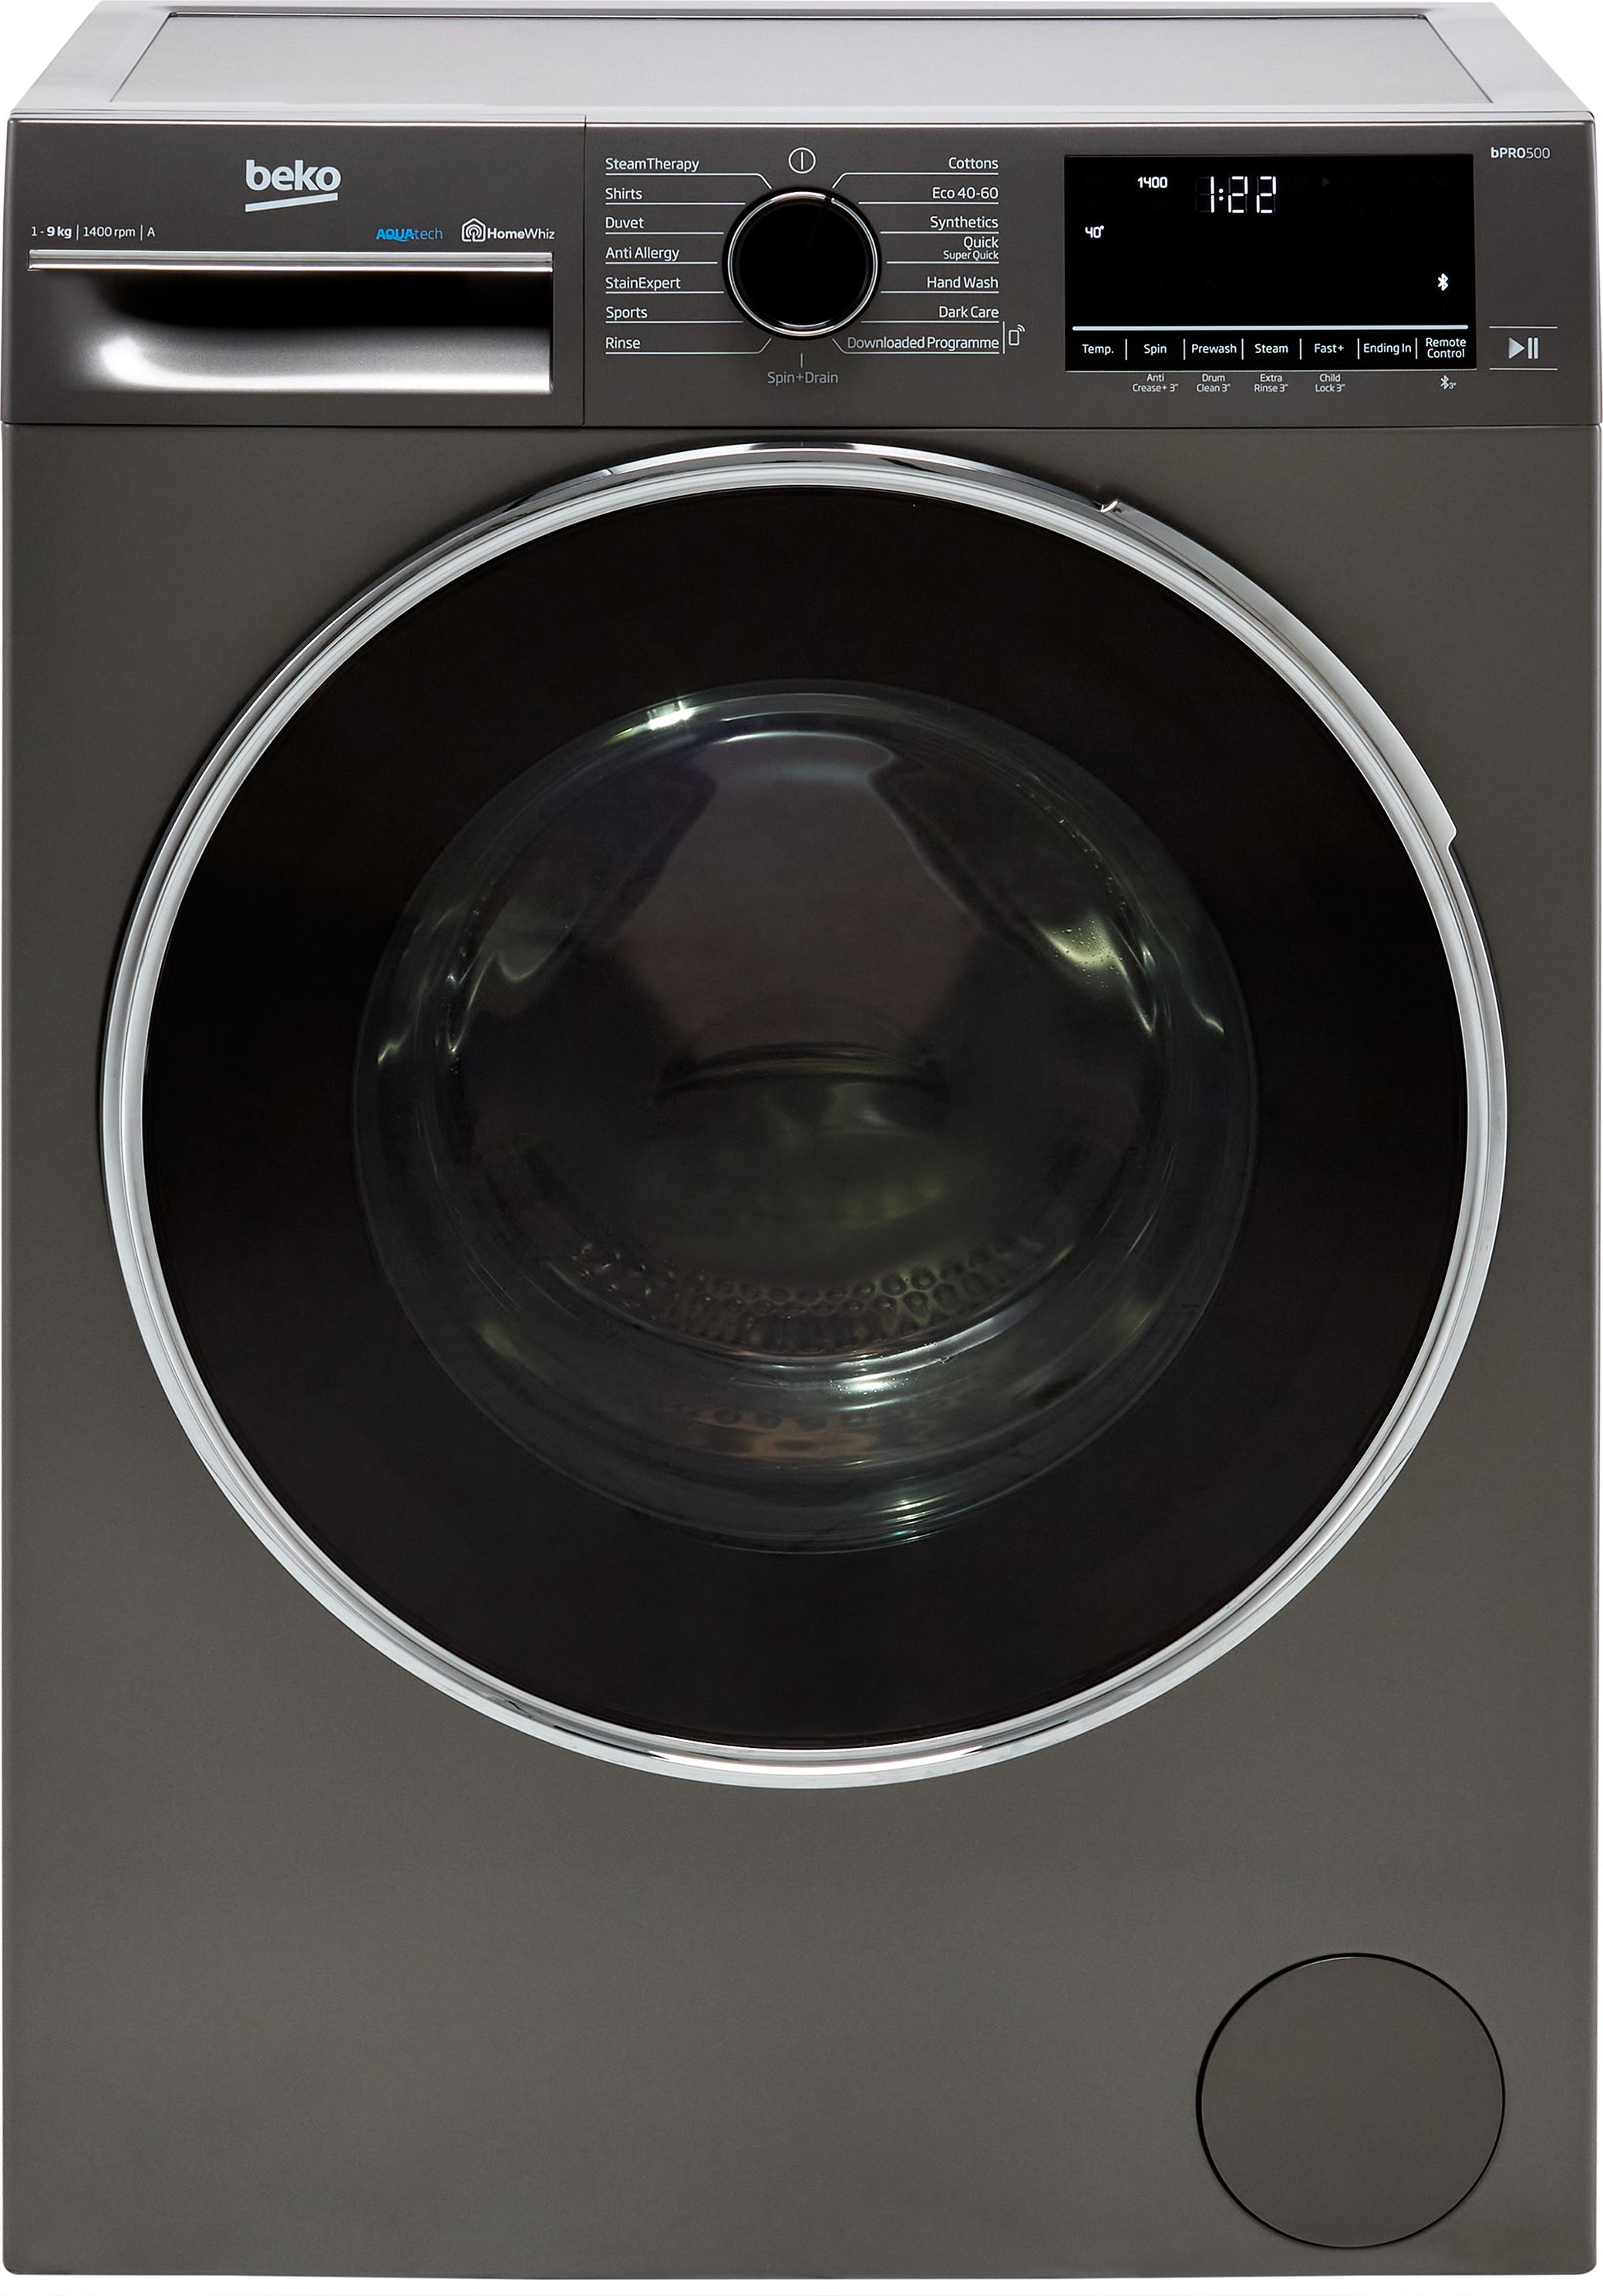 Beko B5W5941AG 9kg Washing Machine with 1400 rpm - Graphite - A Rated, Silver